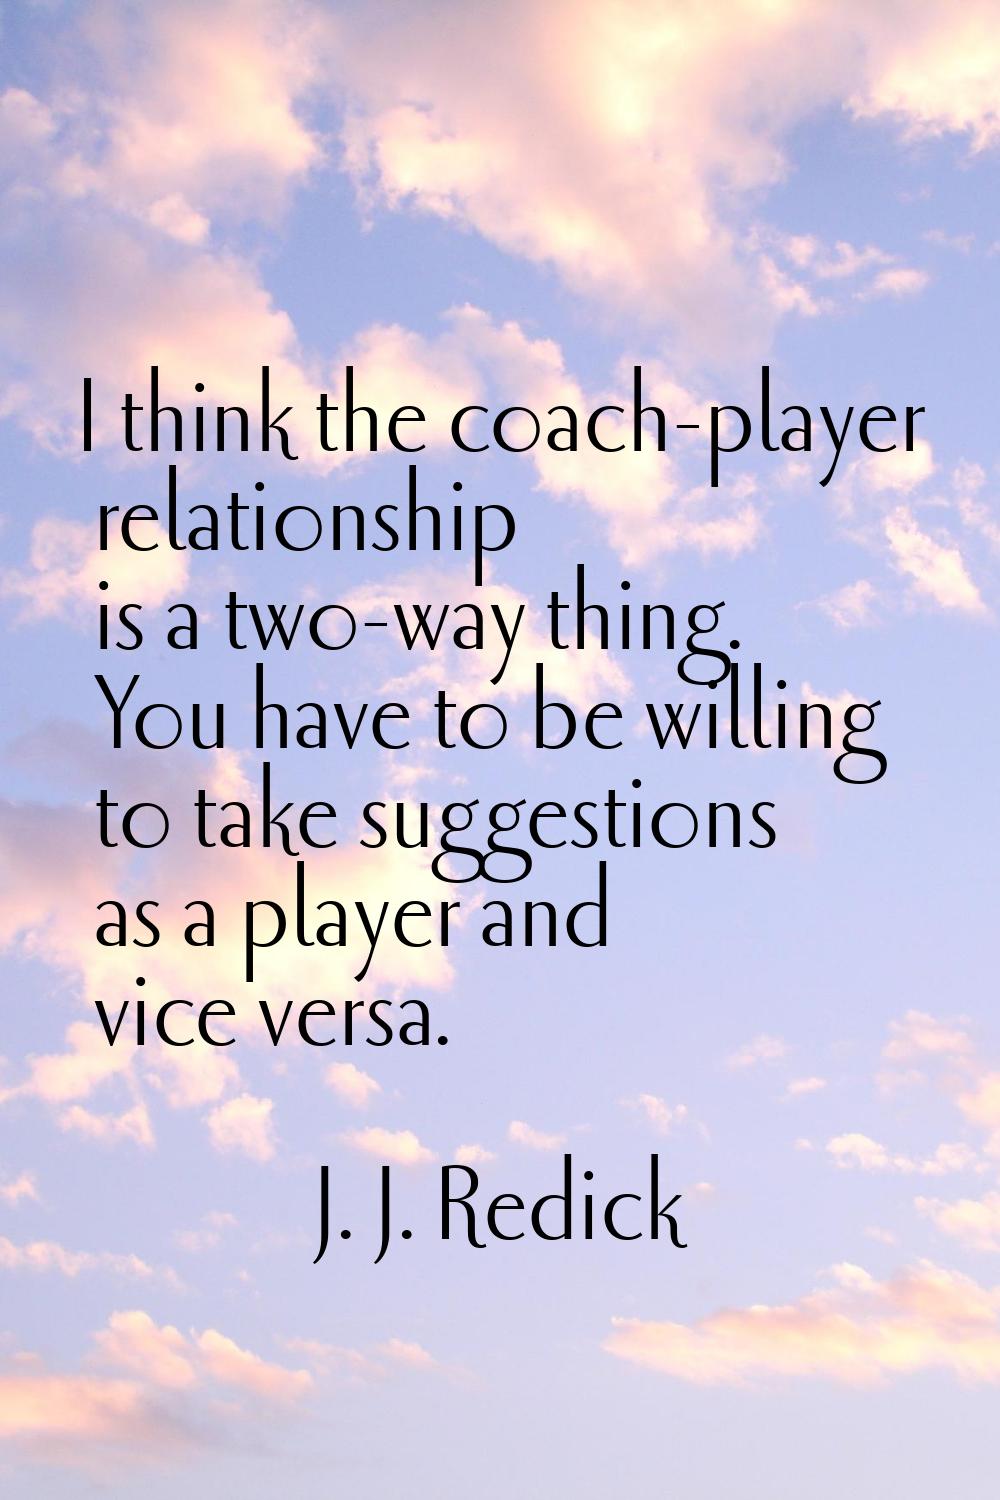 I think the coach-player relationship is a two-way thing. You have to be willing to take suggestion